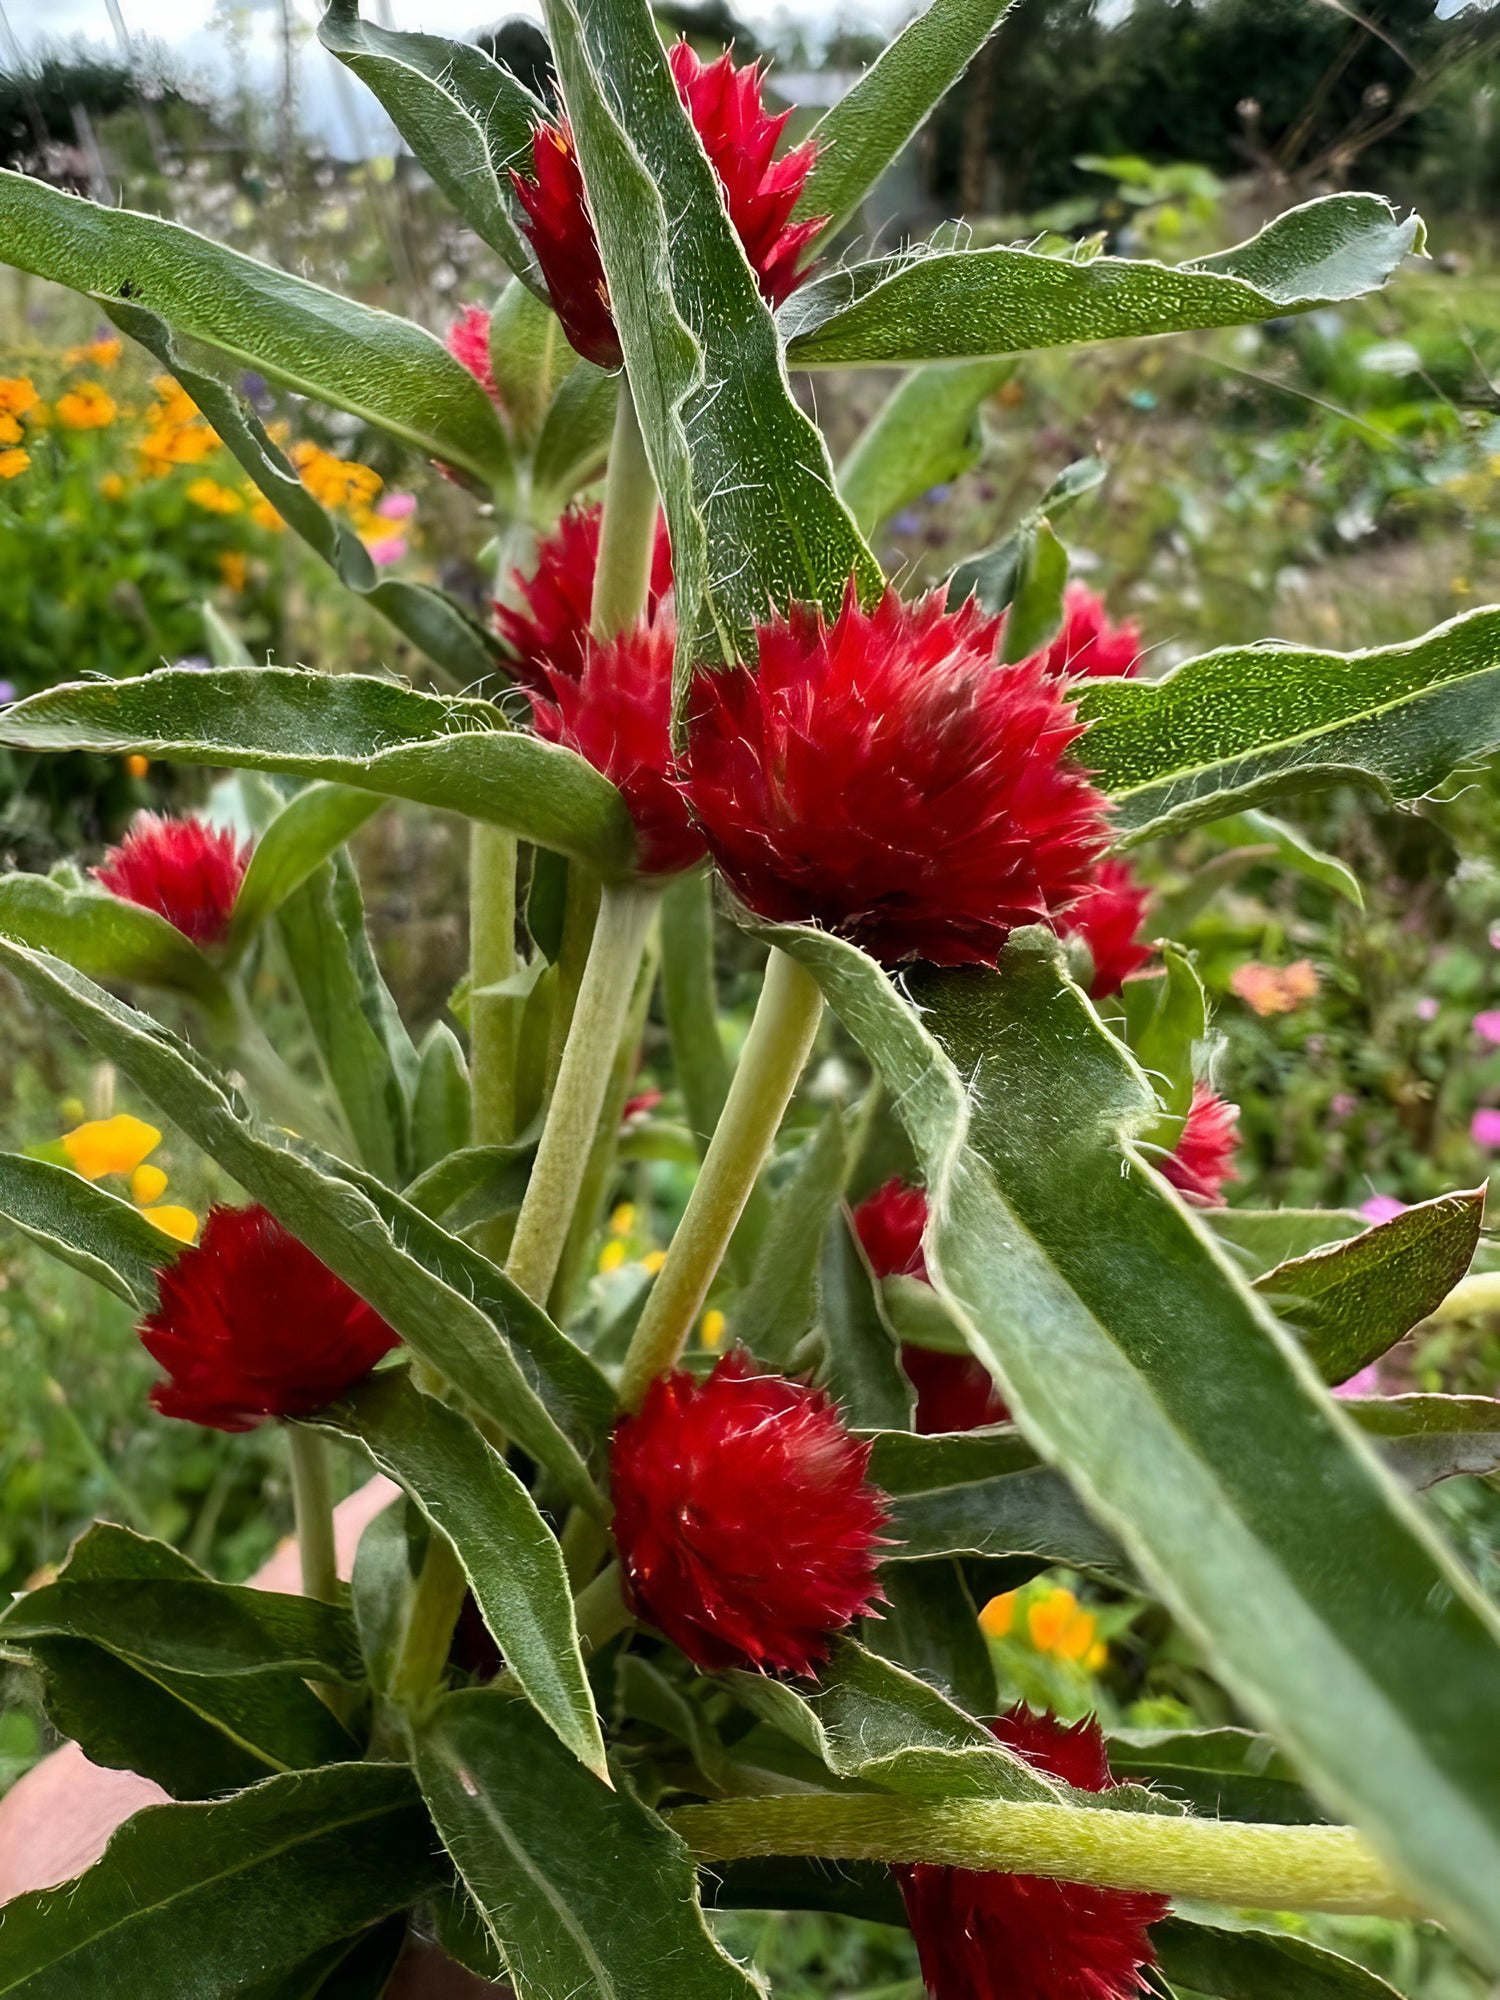 Hand presenting a single stem of Gomphrena Strawberry Fields with a spherical red flower